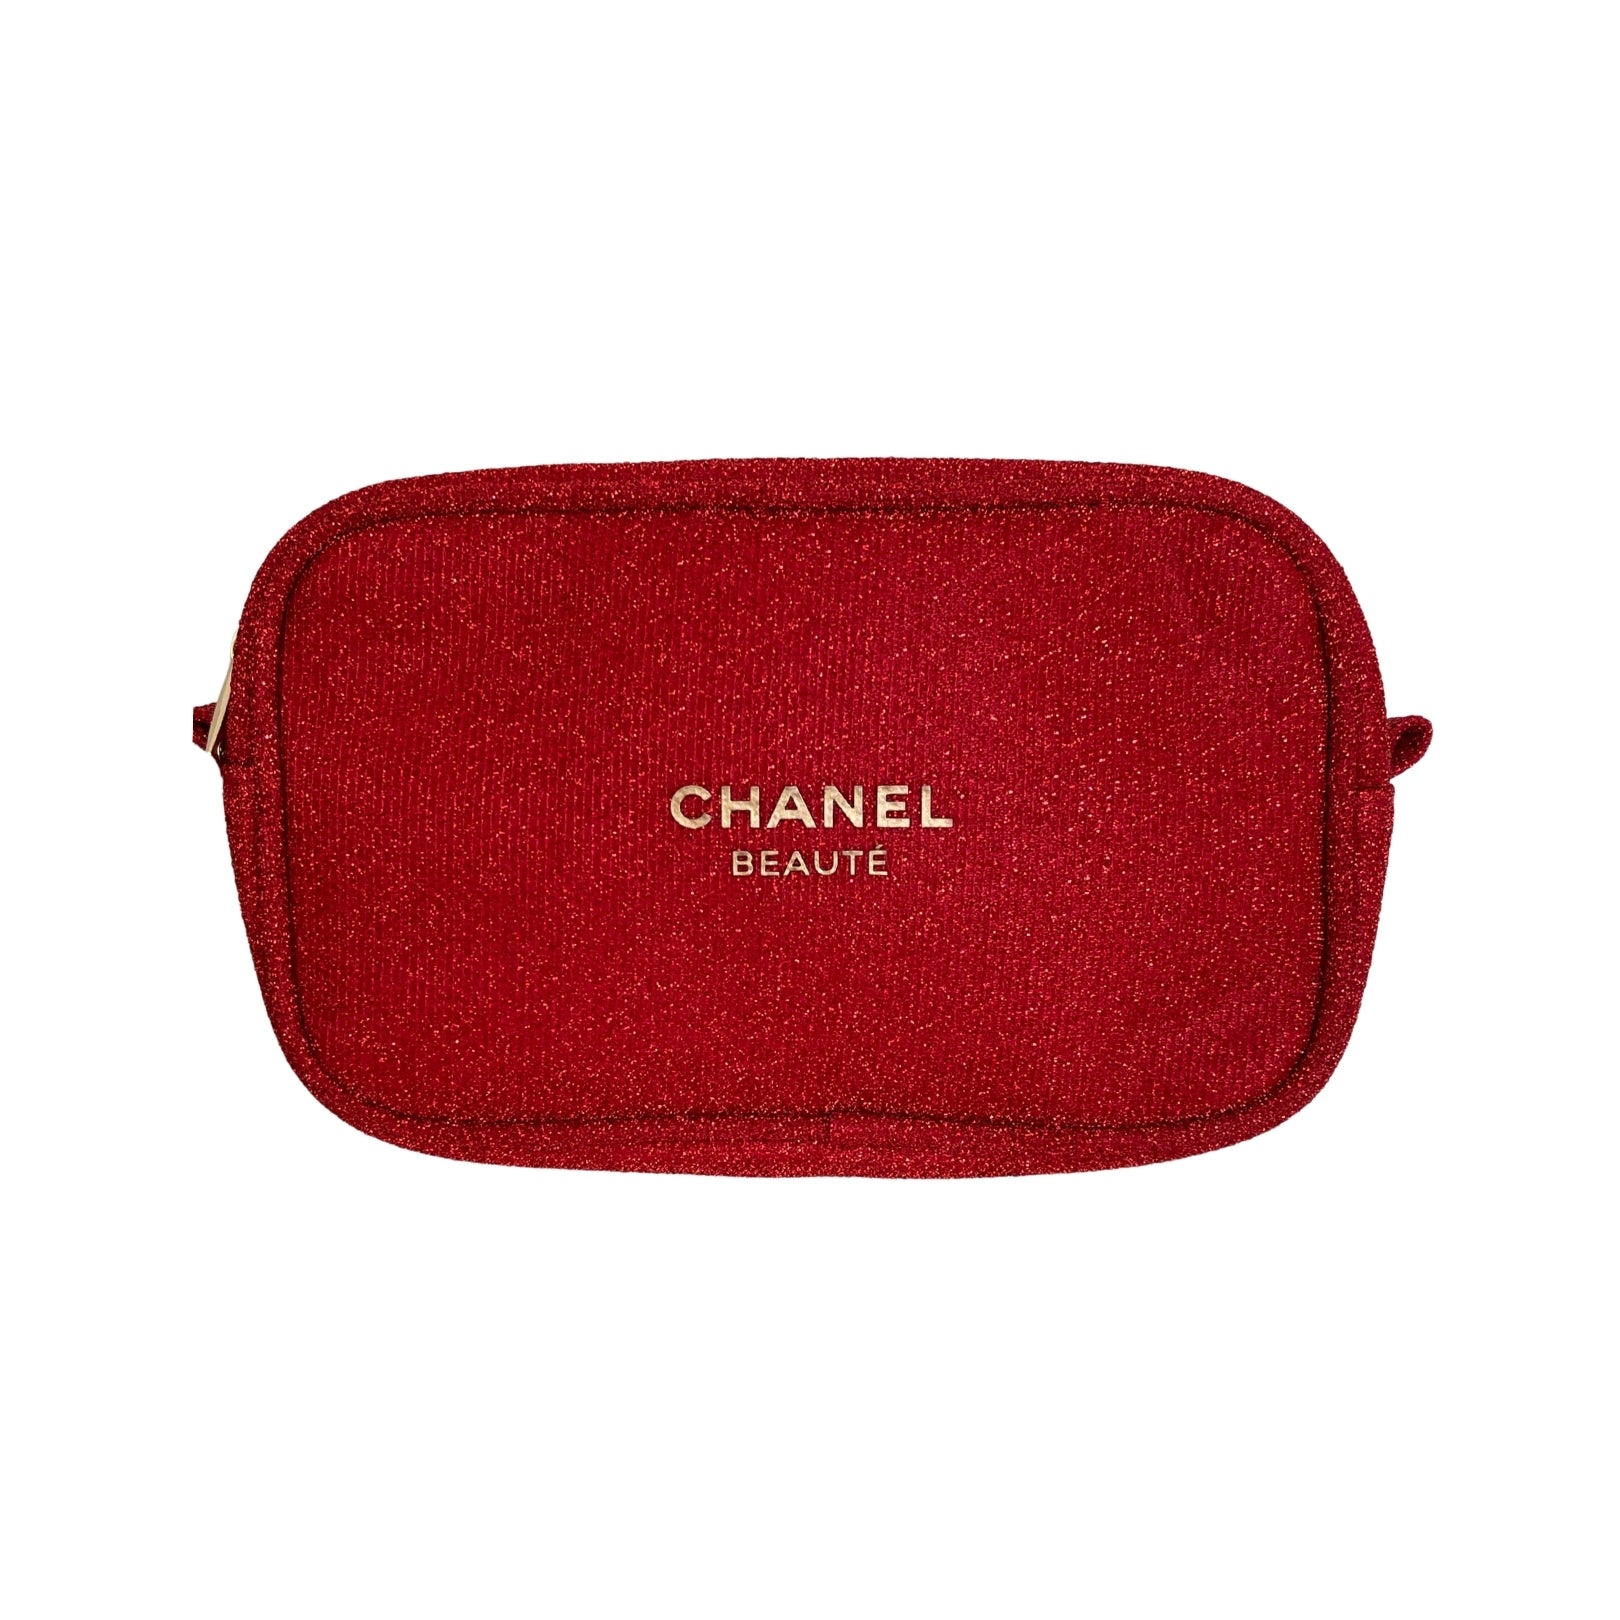 Chanel Beaute Cosmetic Makeup Bag Pouch Clutch BLACK India